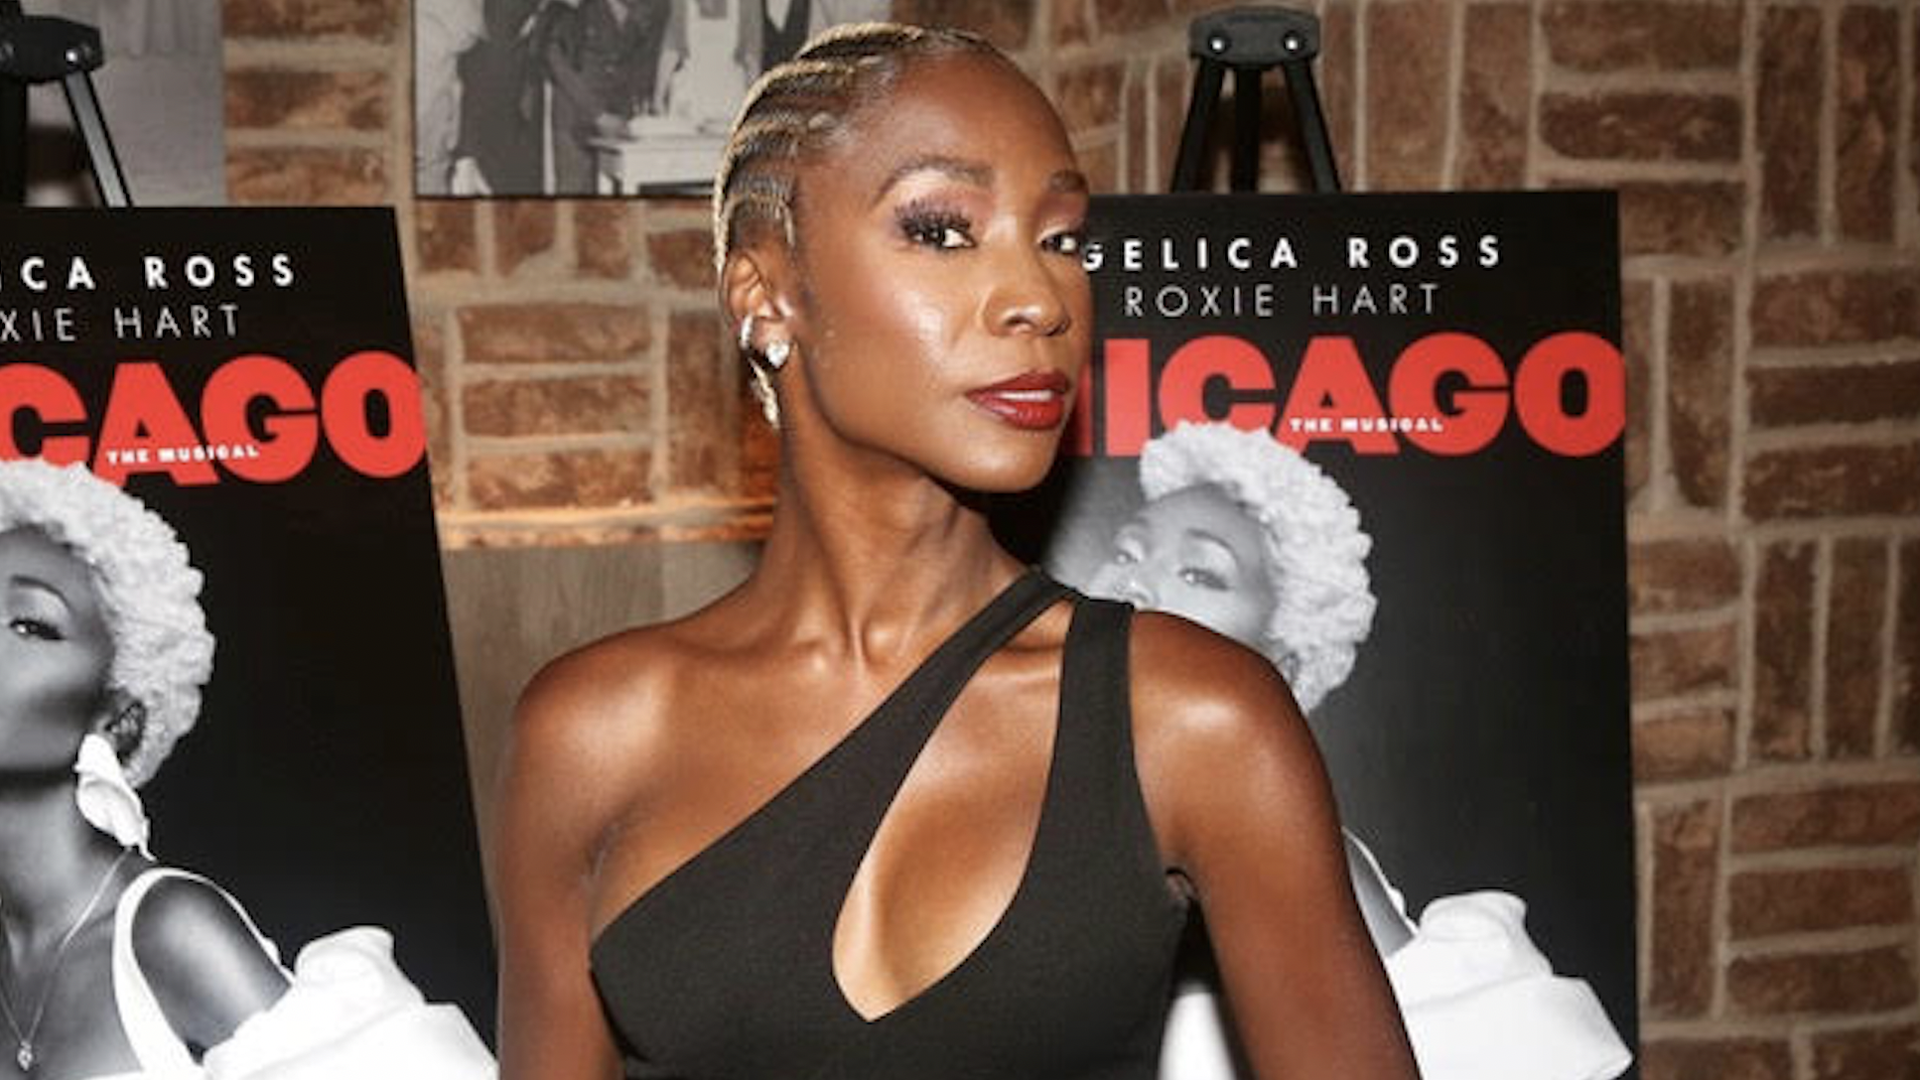 Actress Angelica Ross became the first openly transgender woman to star on Broadway when she debuted Monday as Roxie Hart in "Chicago."